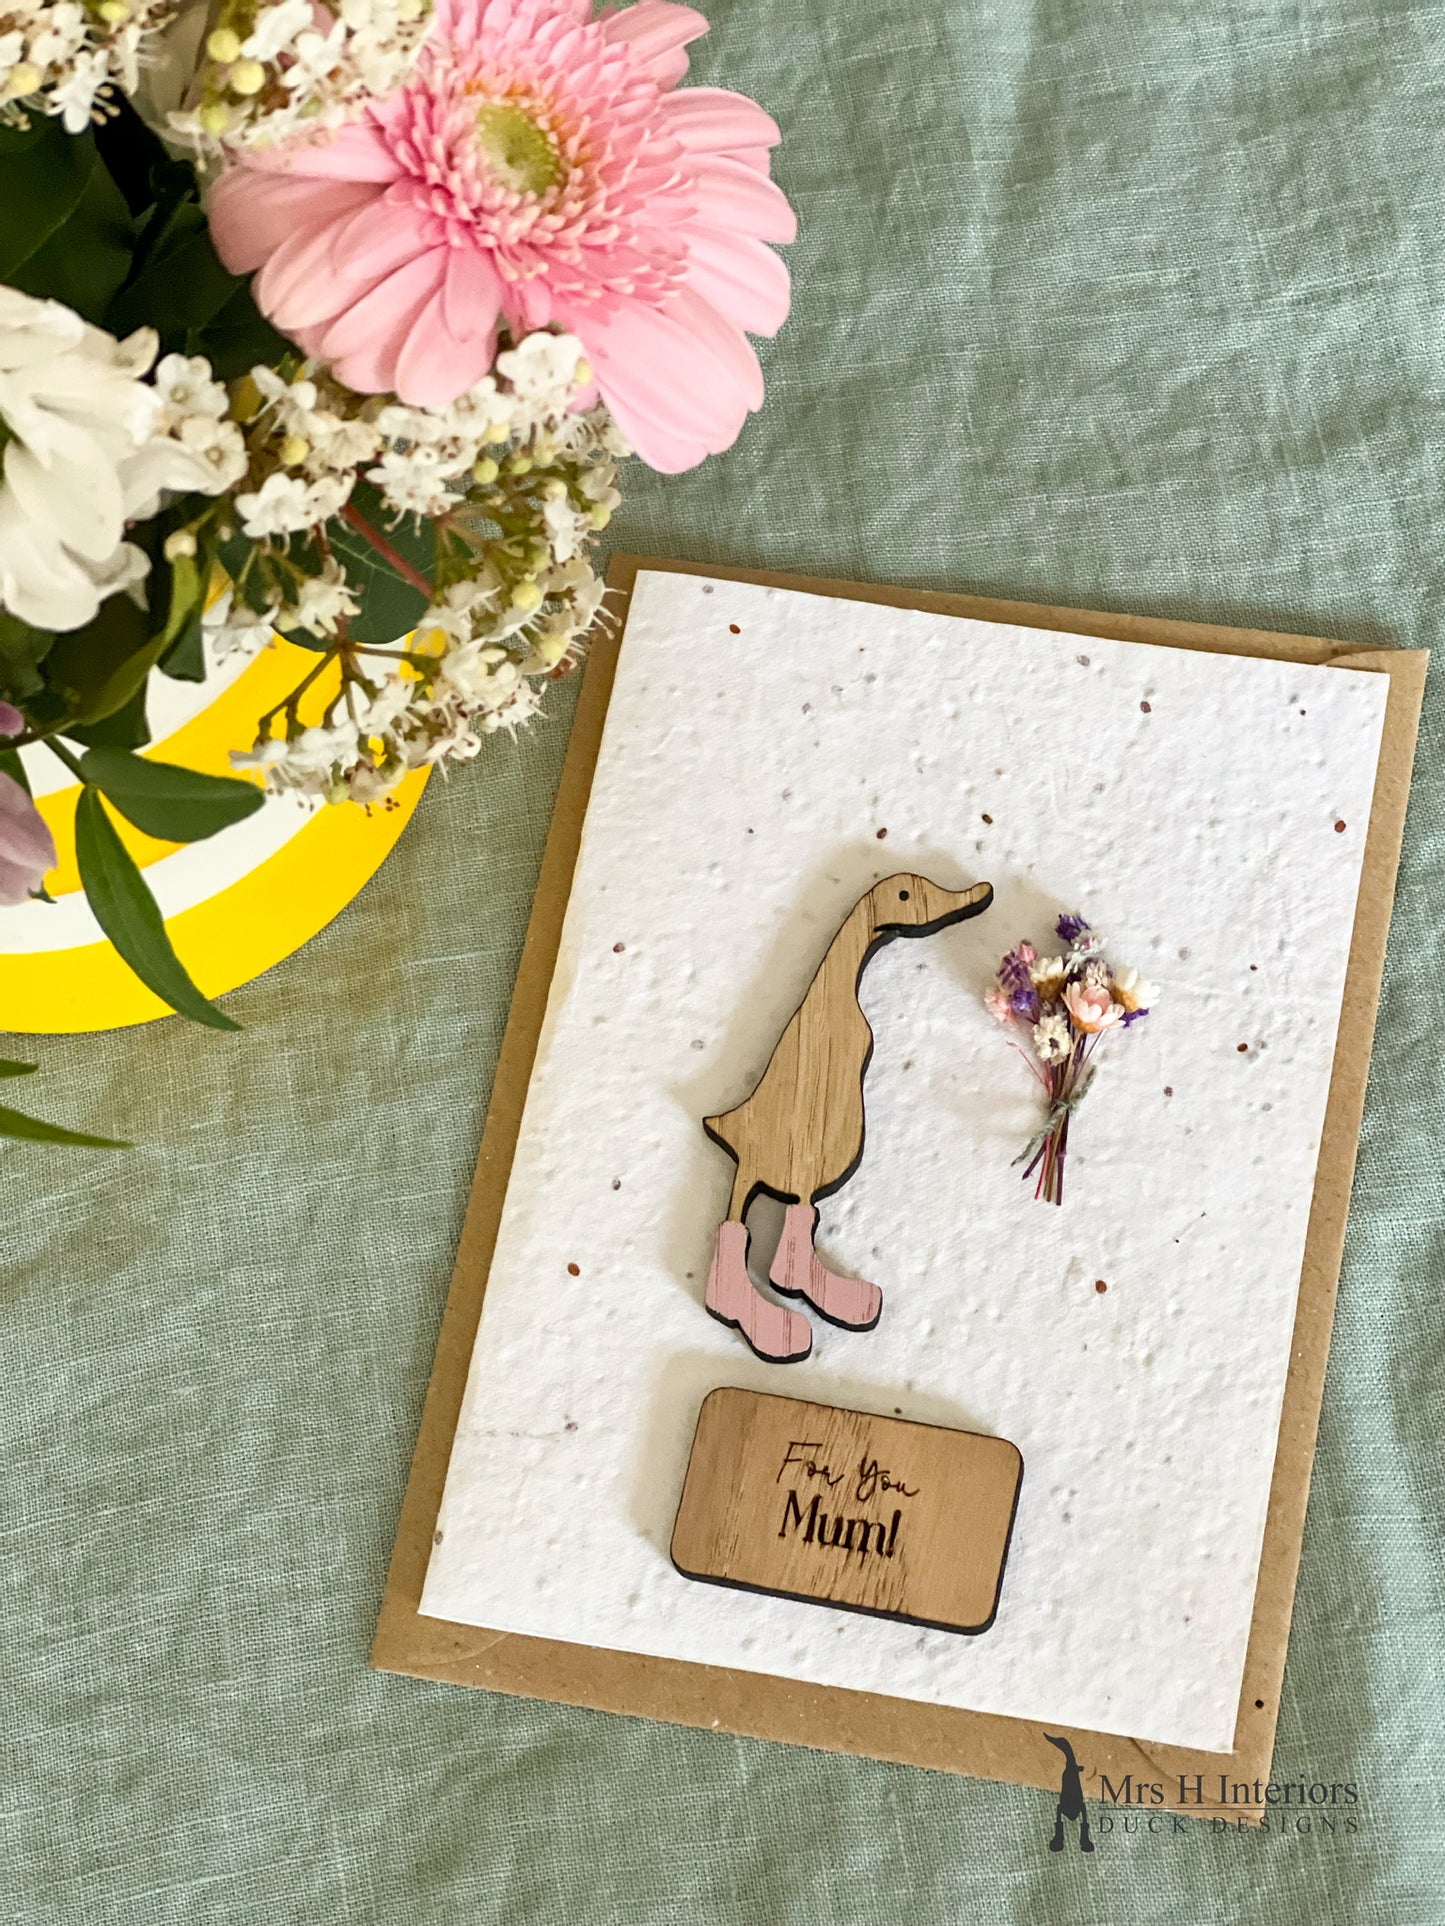 For You Mum - Duck with Flowers - Mother's Day Card - Decorated Wooden Duck in Boots by Mrs H the Duck Lady